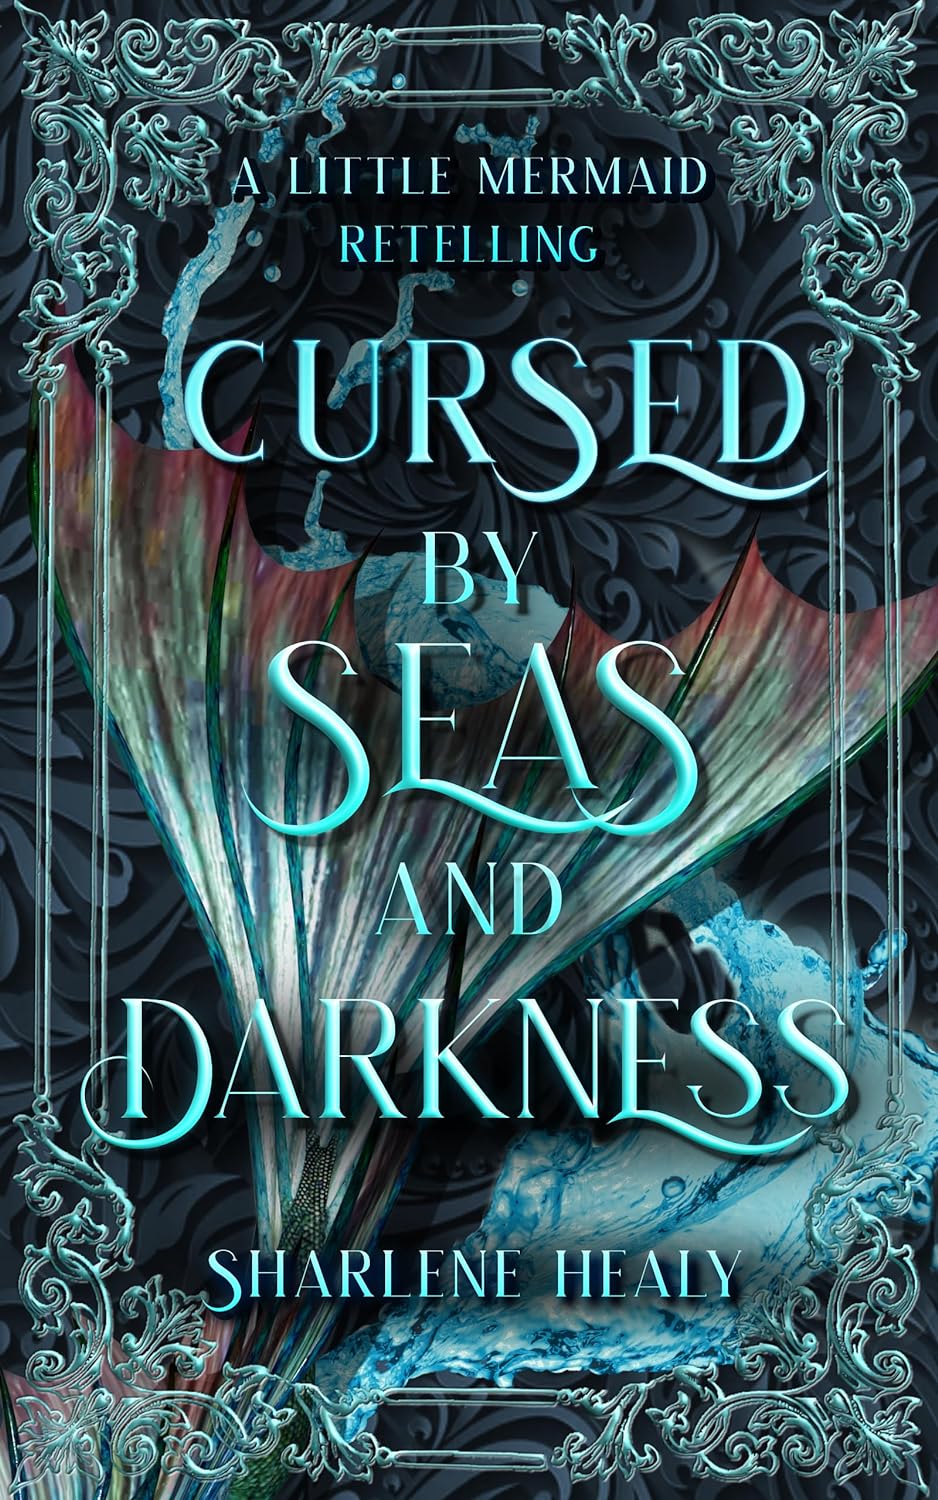 Cursed by Seas and Darkness